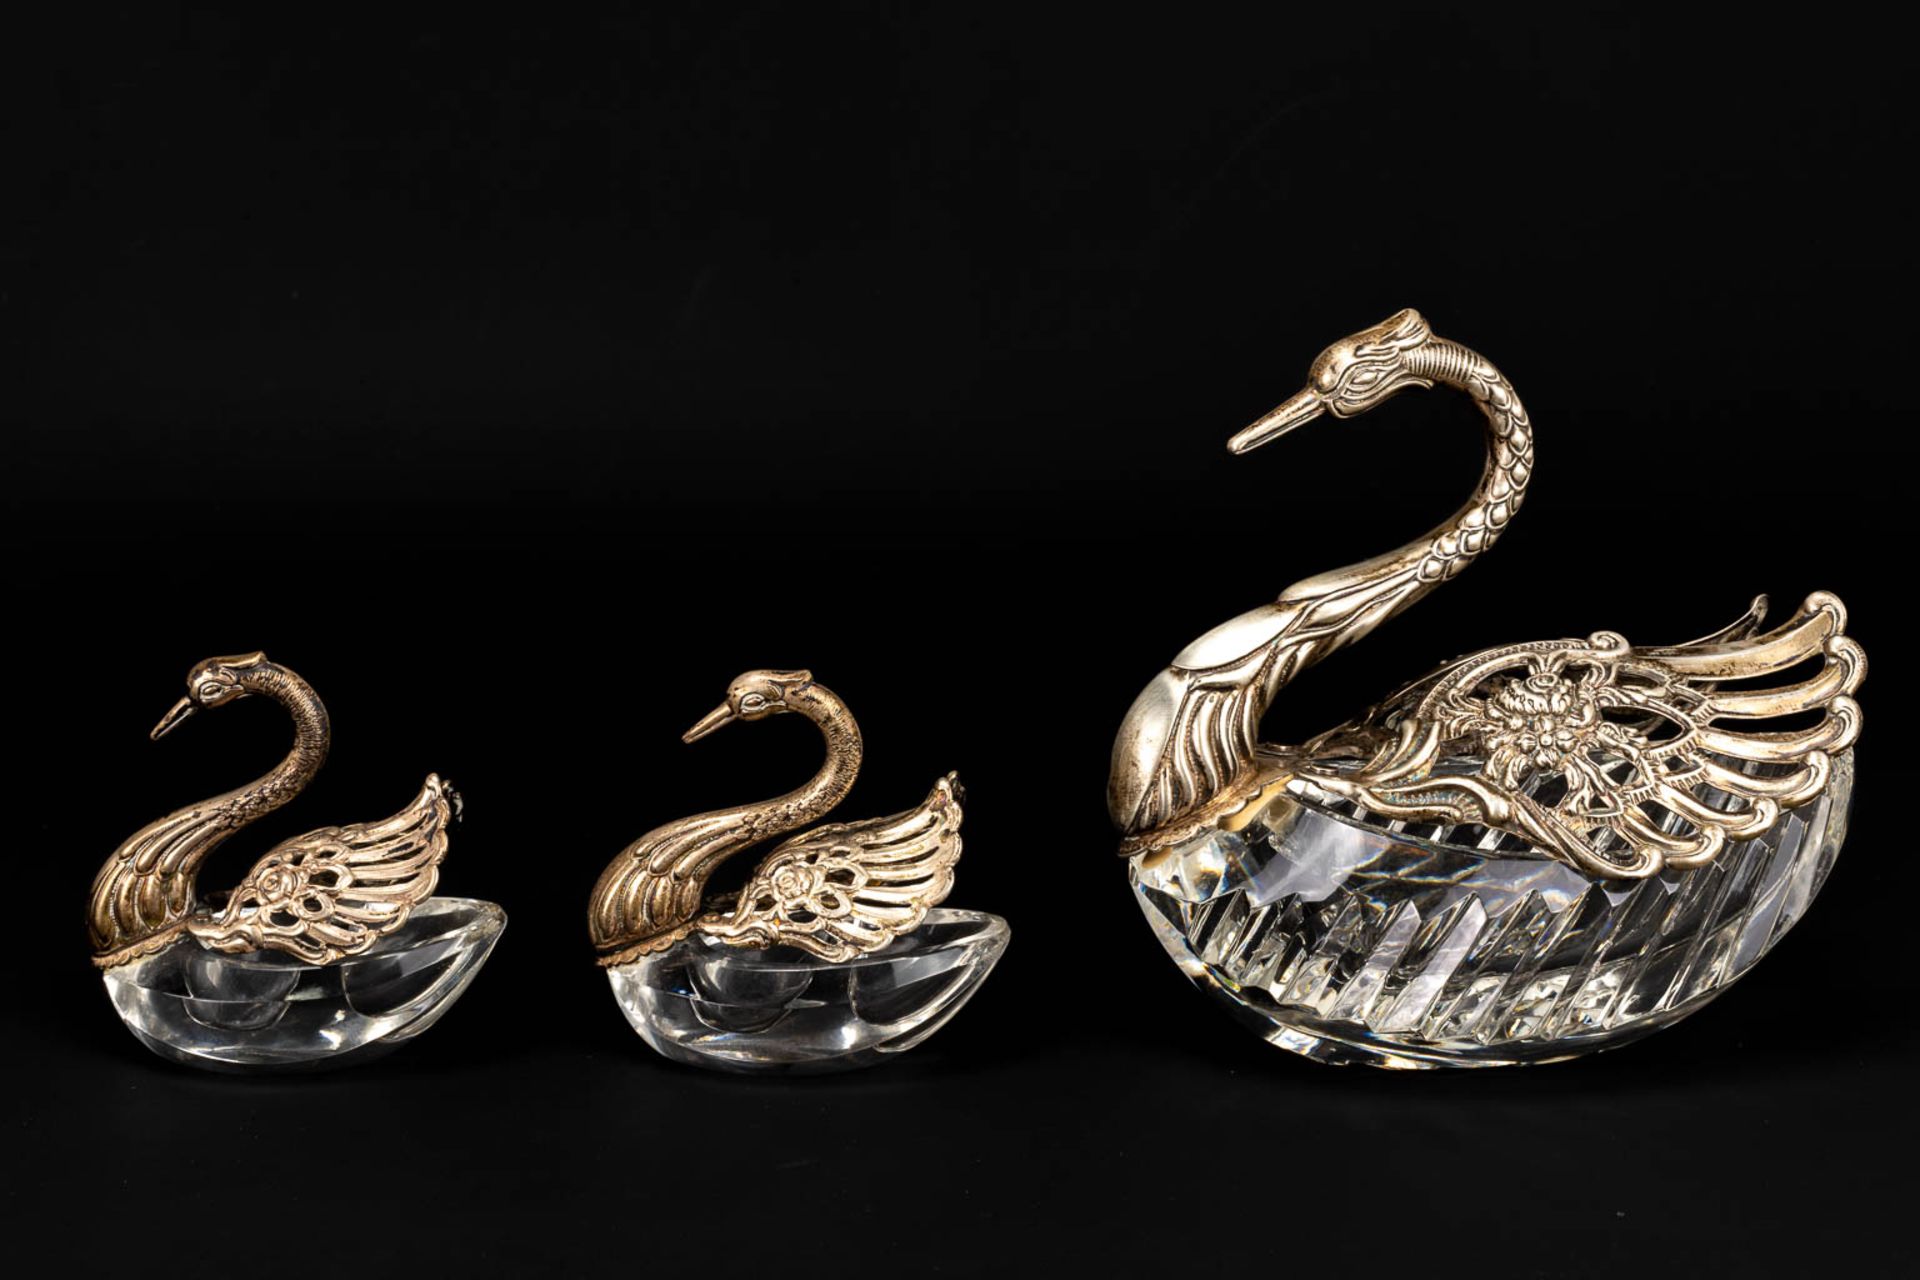 A collection of 3 sugar pots in the shape of a swan, made of crystal and solid silver. - Image 8 of 13